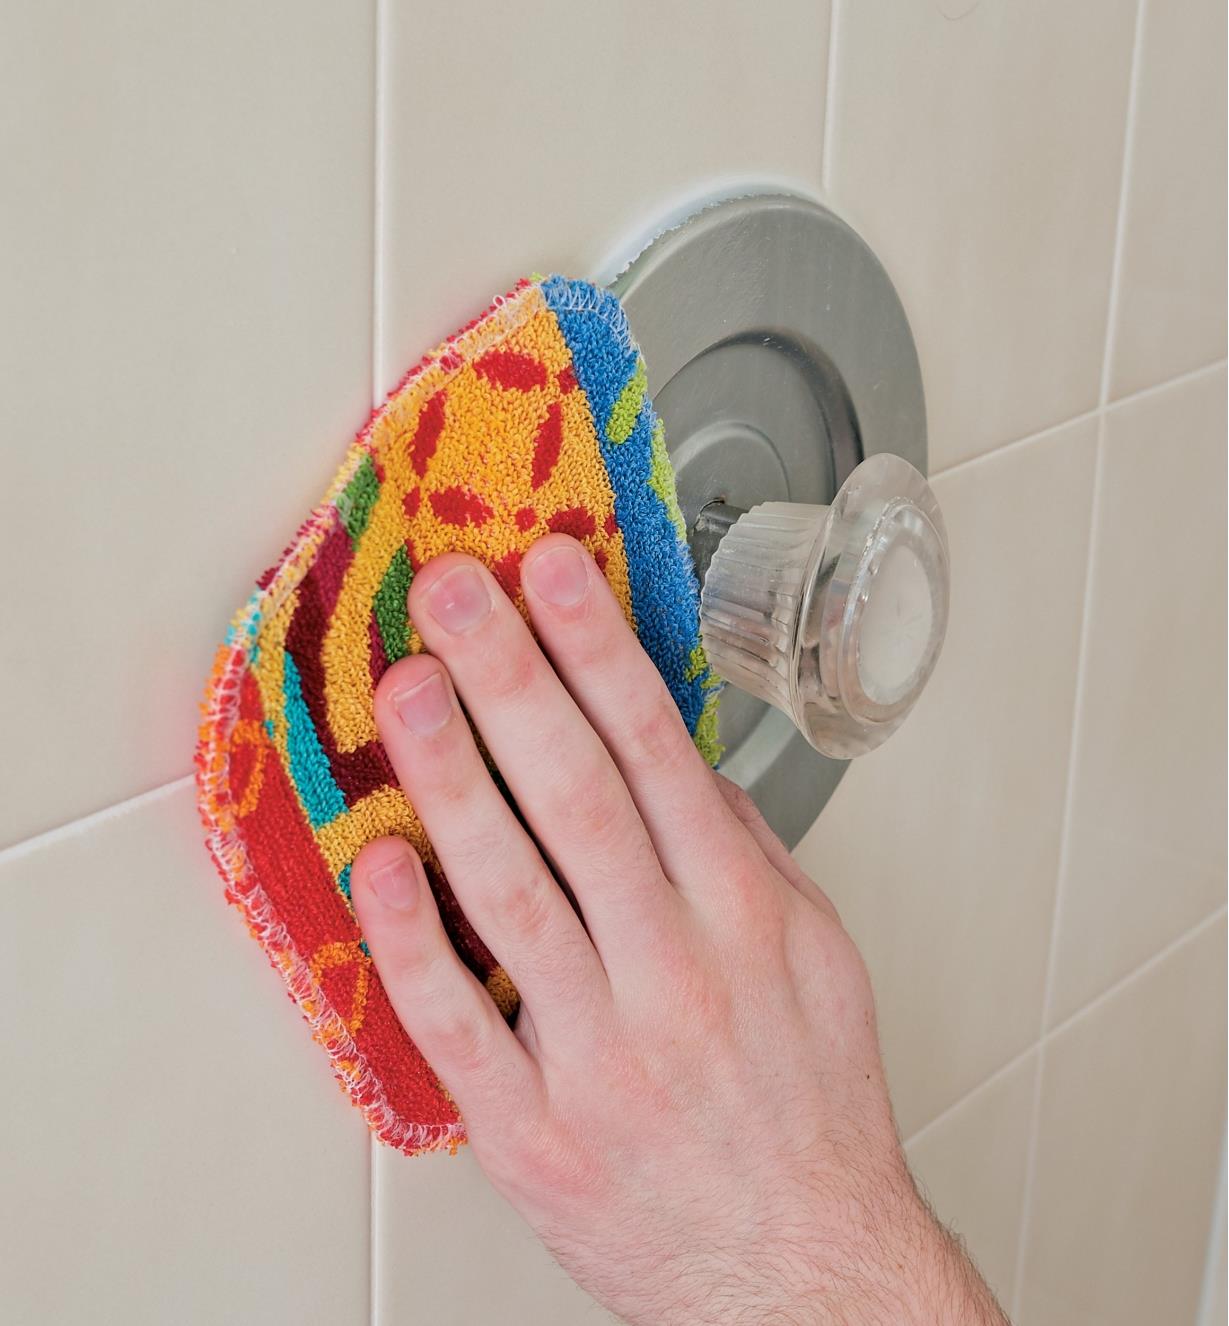 Using the Euroscrubby Scouring Pad to clean a shower faucet